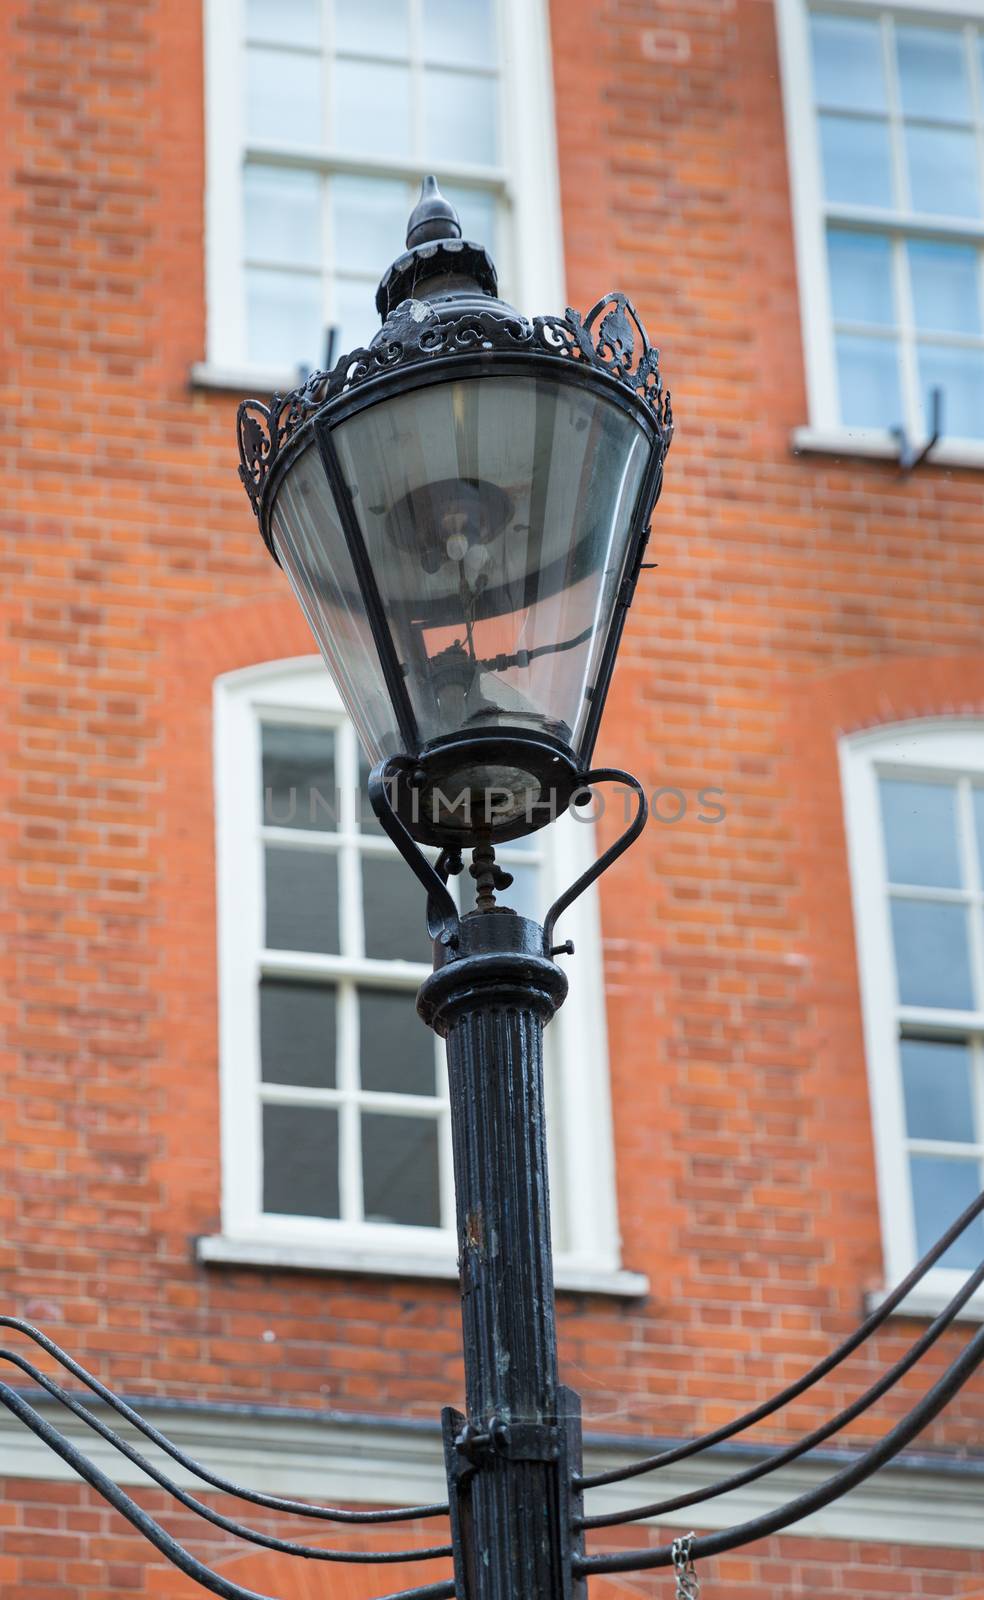 Original Gas Lamp in London, adapted to electric